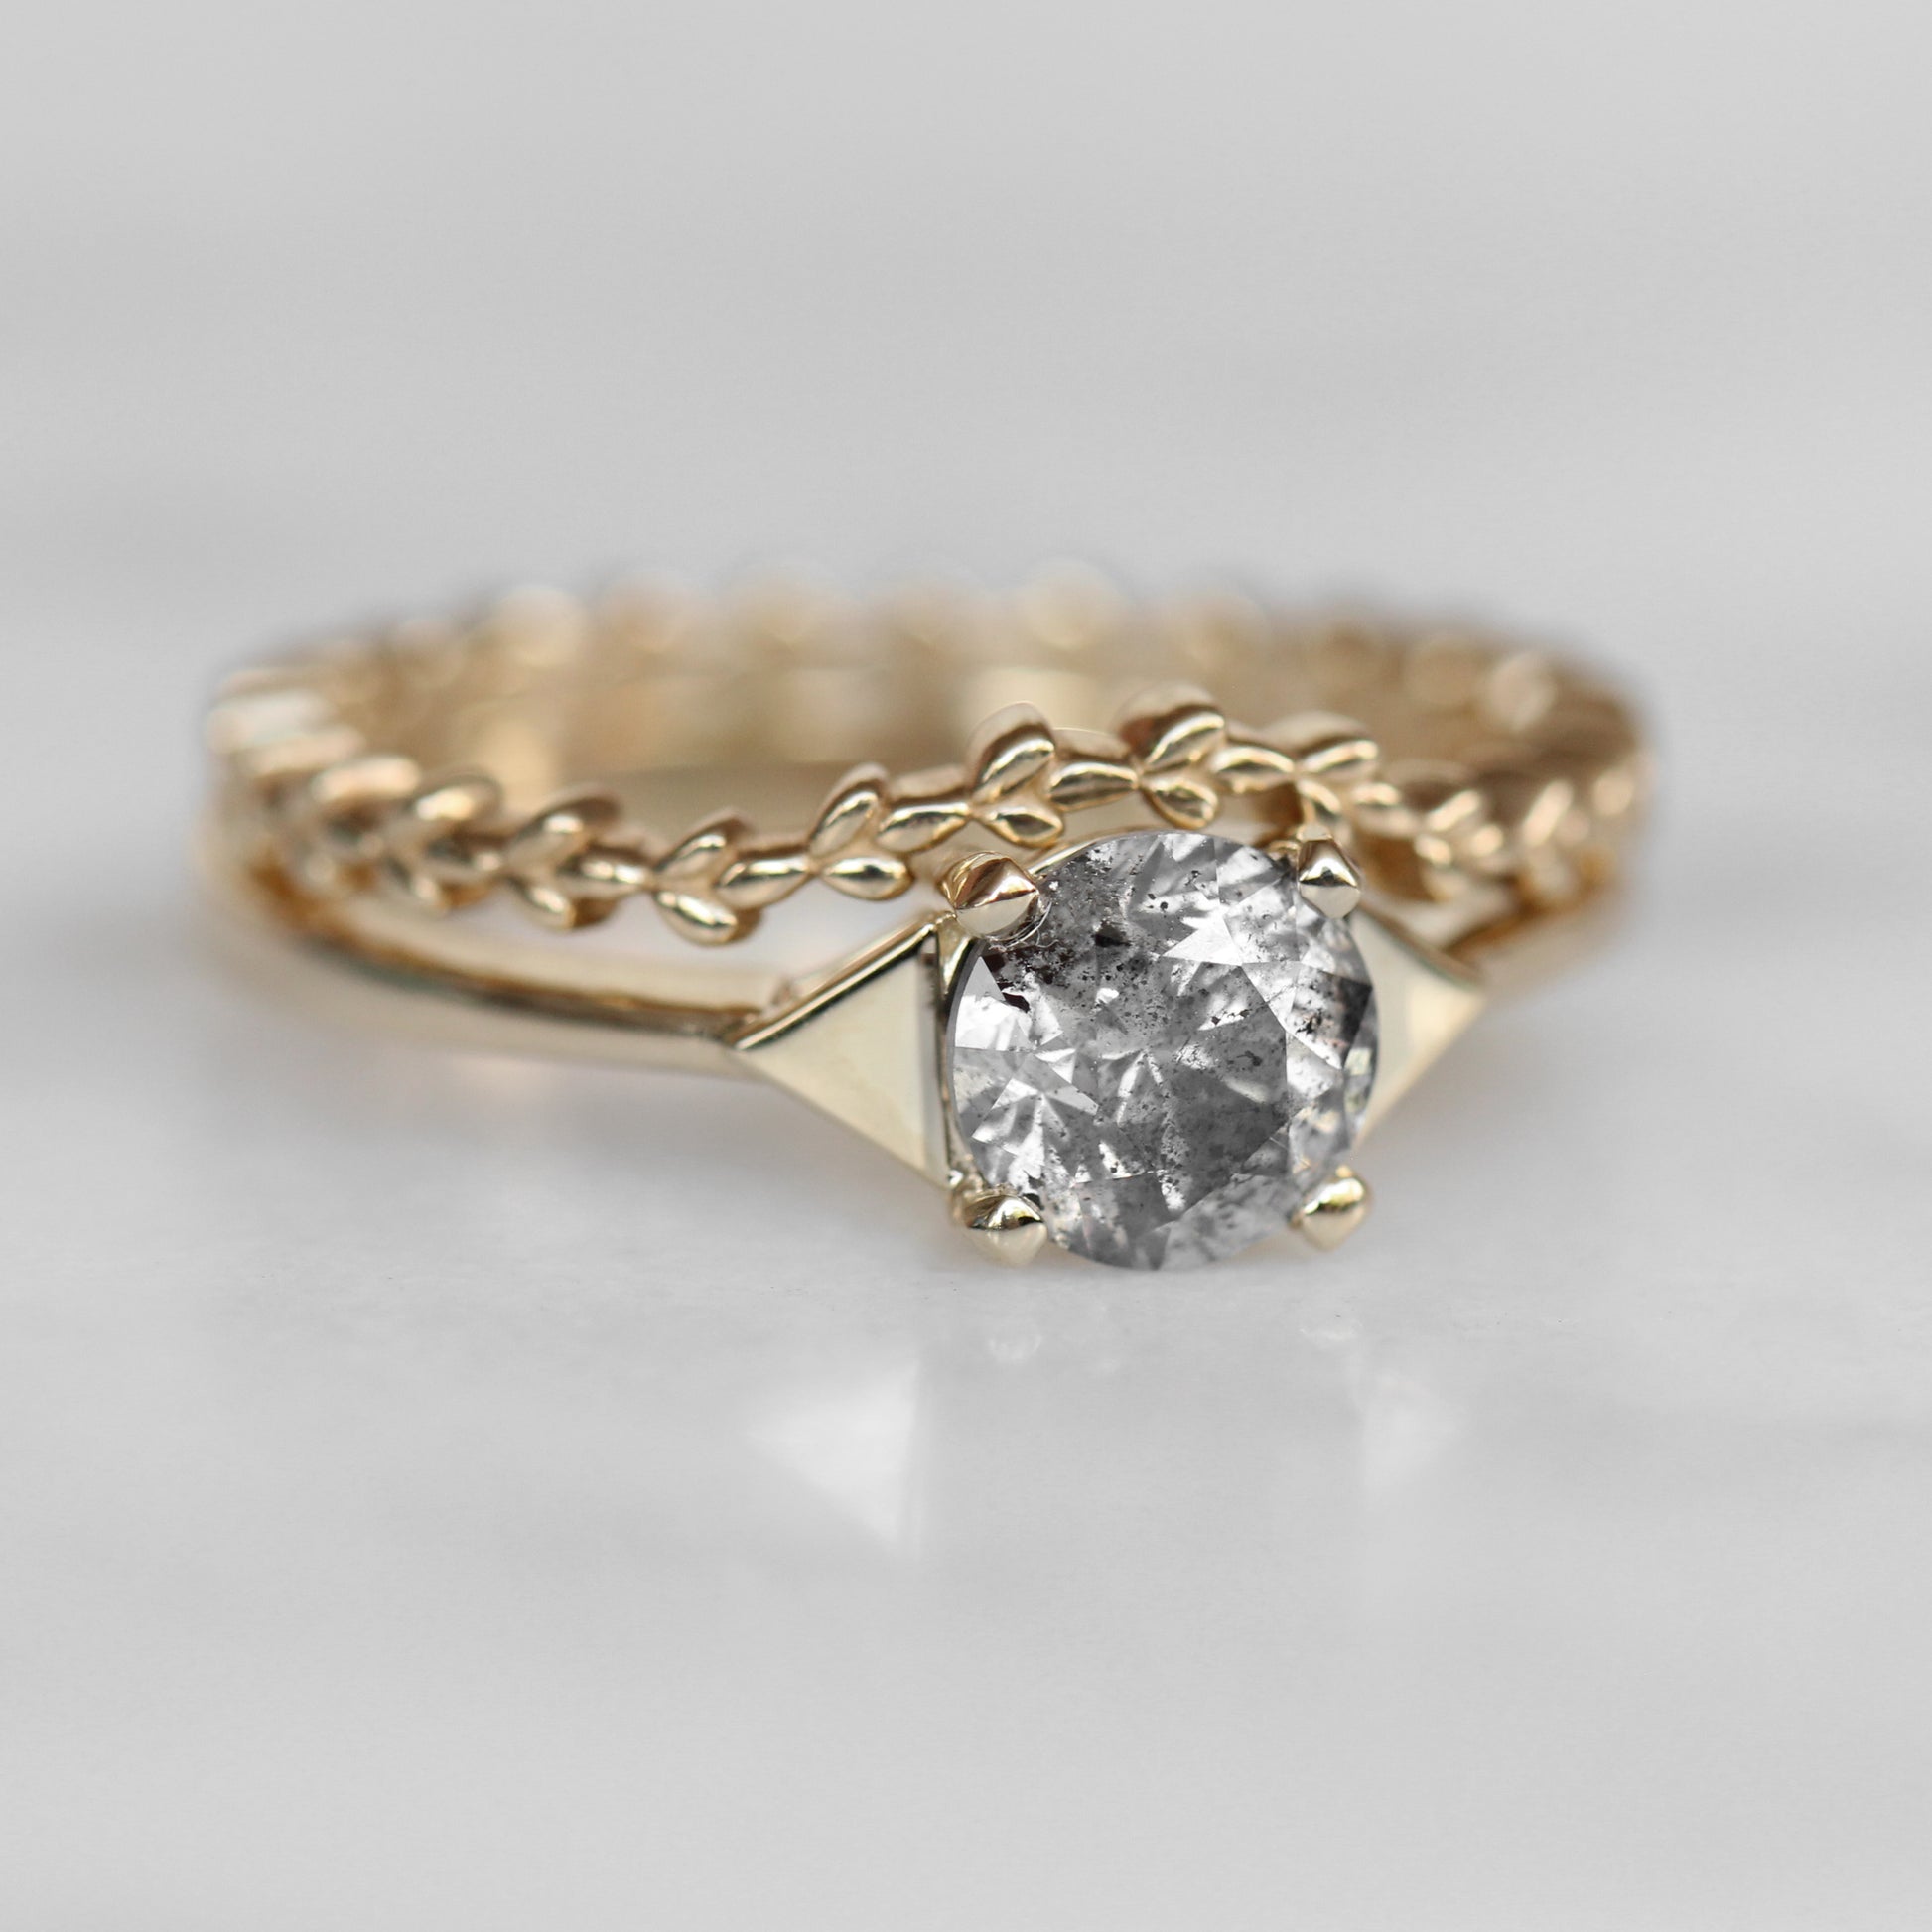 Quinta Ring with a 1.01 brilliant round celestial diamond in 10k yellow gold - ready to size and ship - Midwinter Co. Alternative Bridal Rings and Modern Fine Jewelry